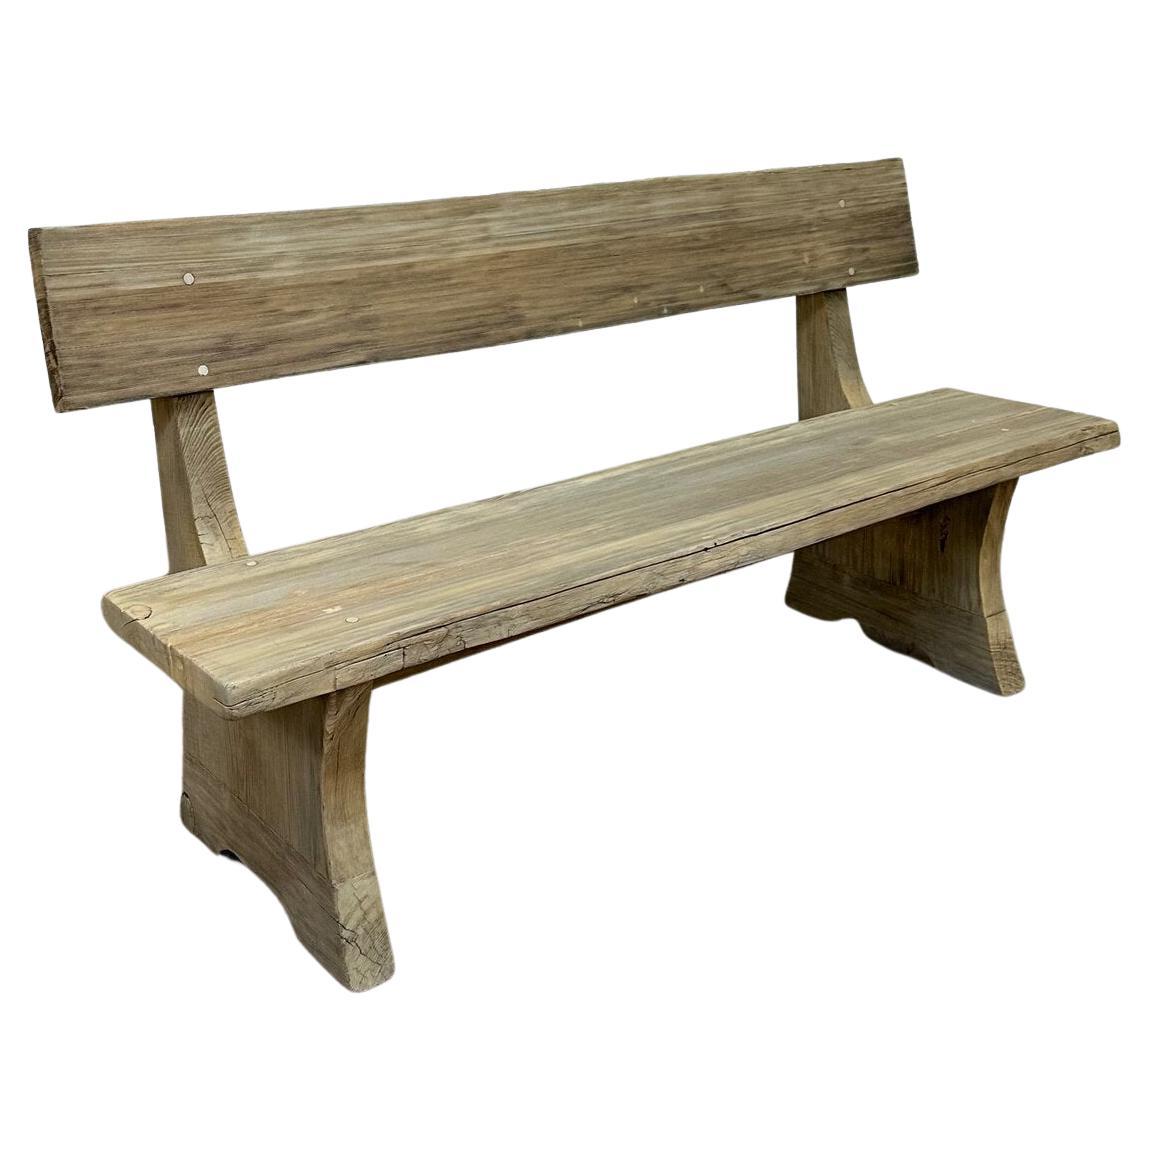 Rustic Solid oak benches -sold separately